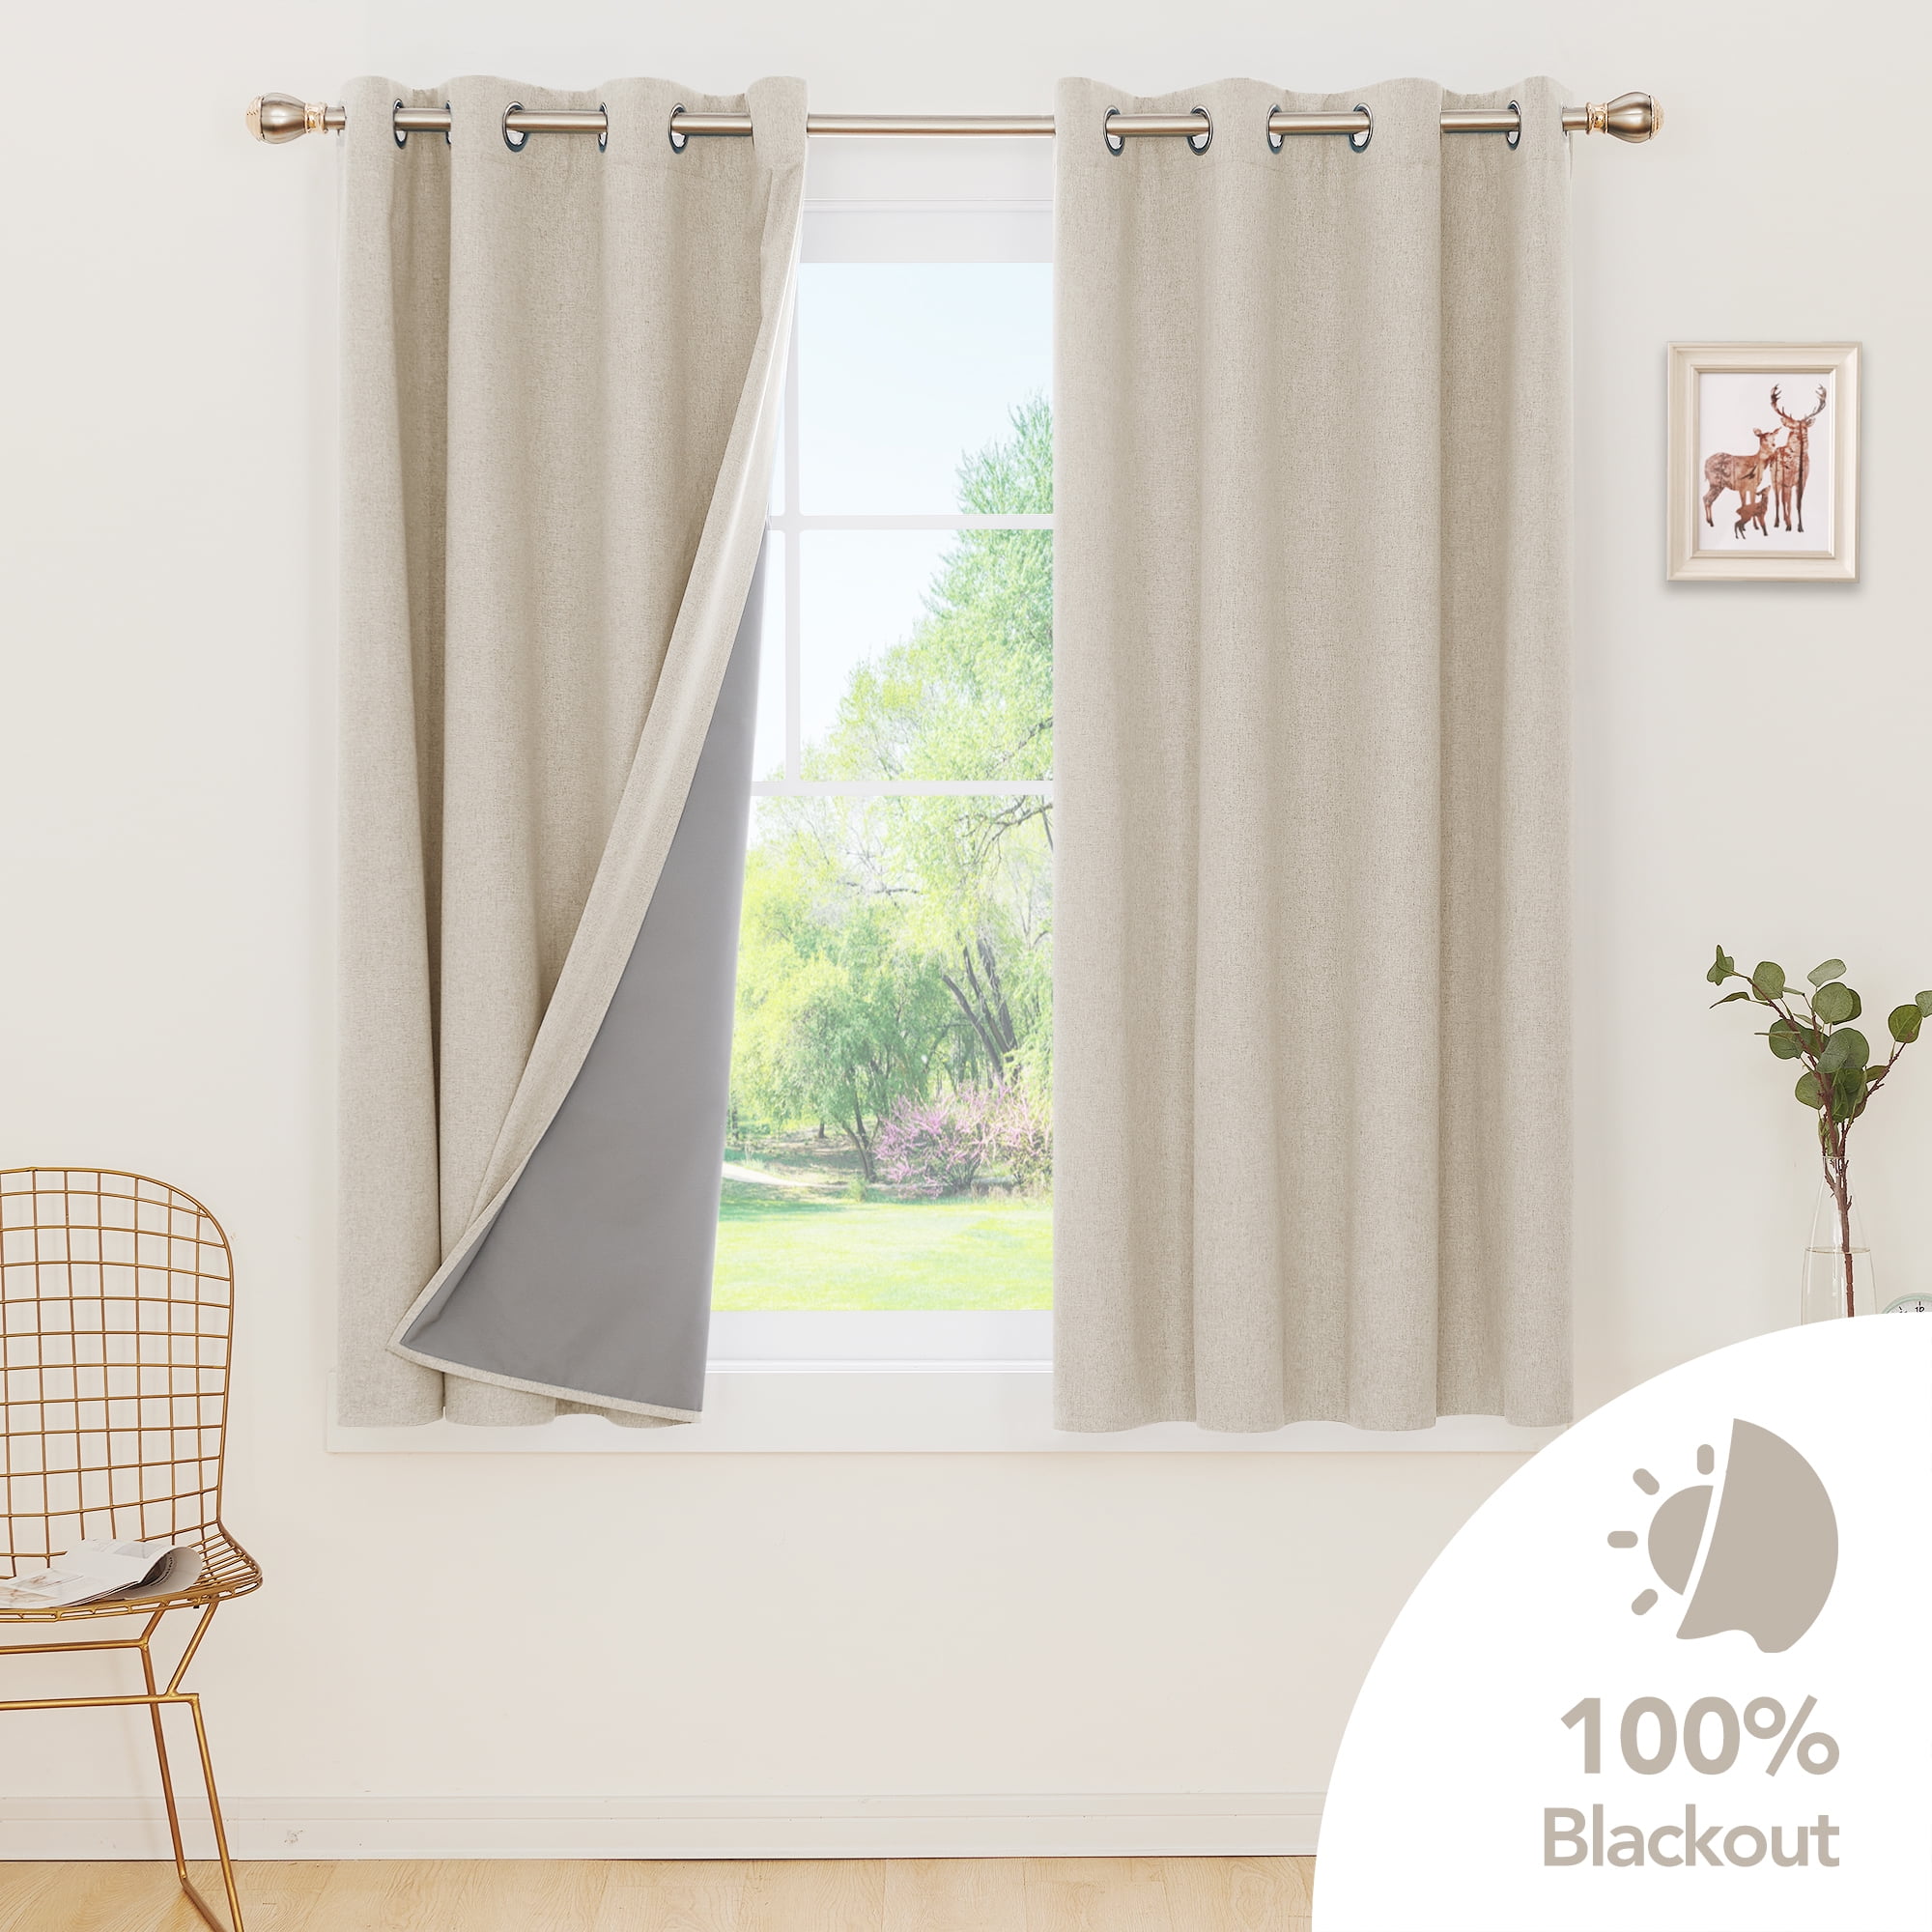 Details about   100% Blackout Curtain for Bedroom Linen Textured Look Drapes with Liner 2 Panels 